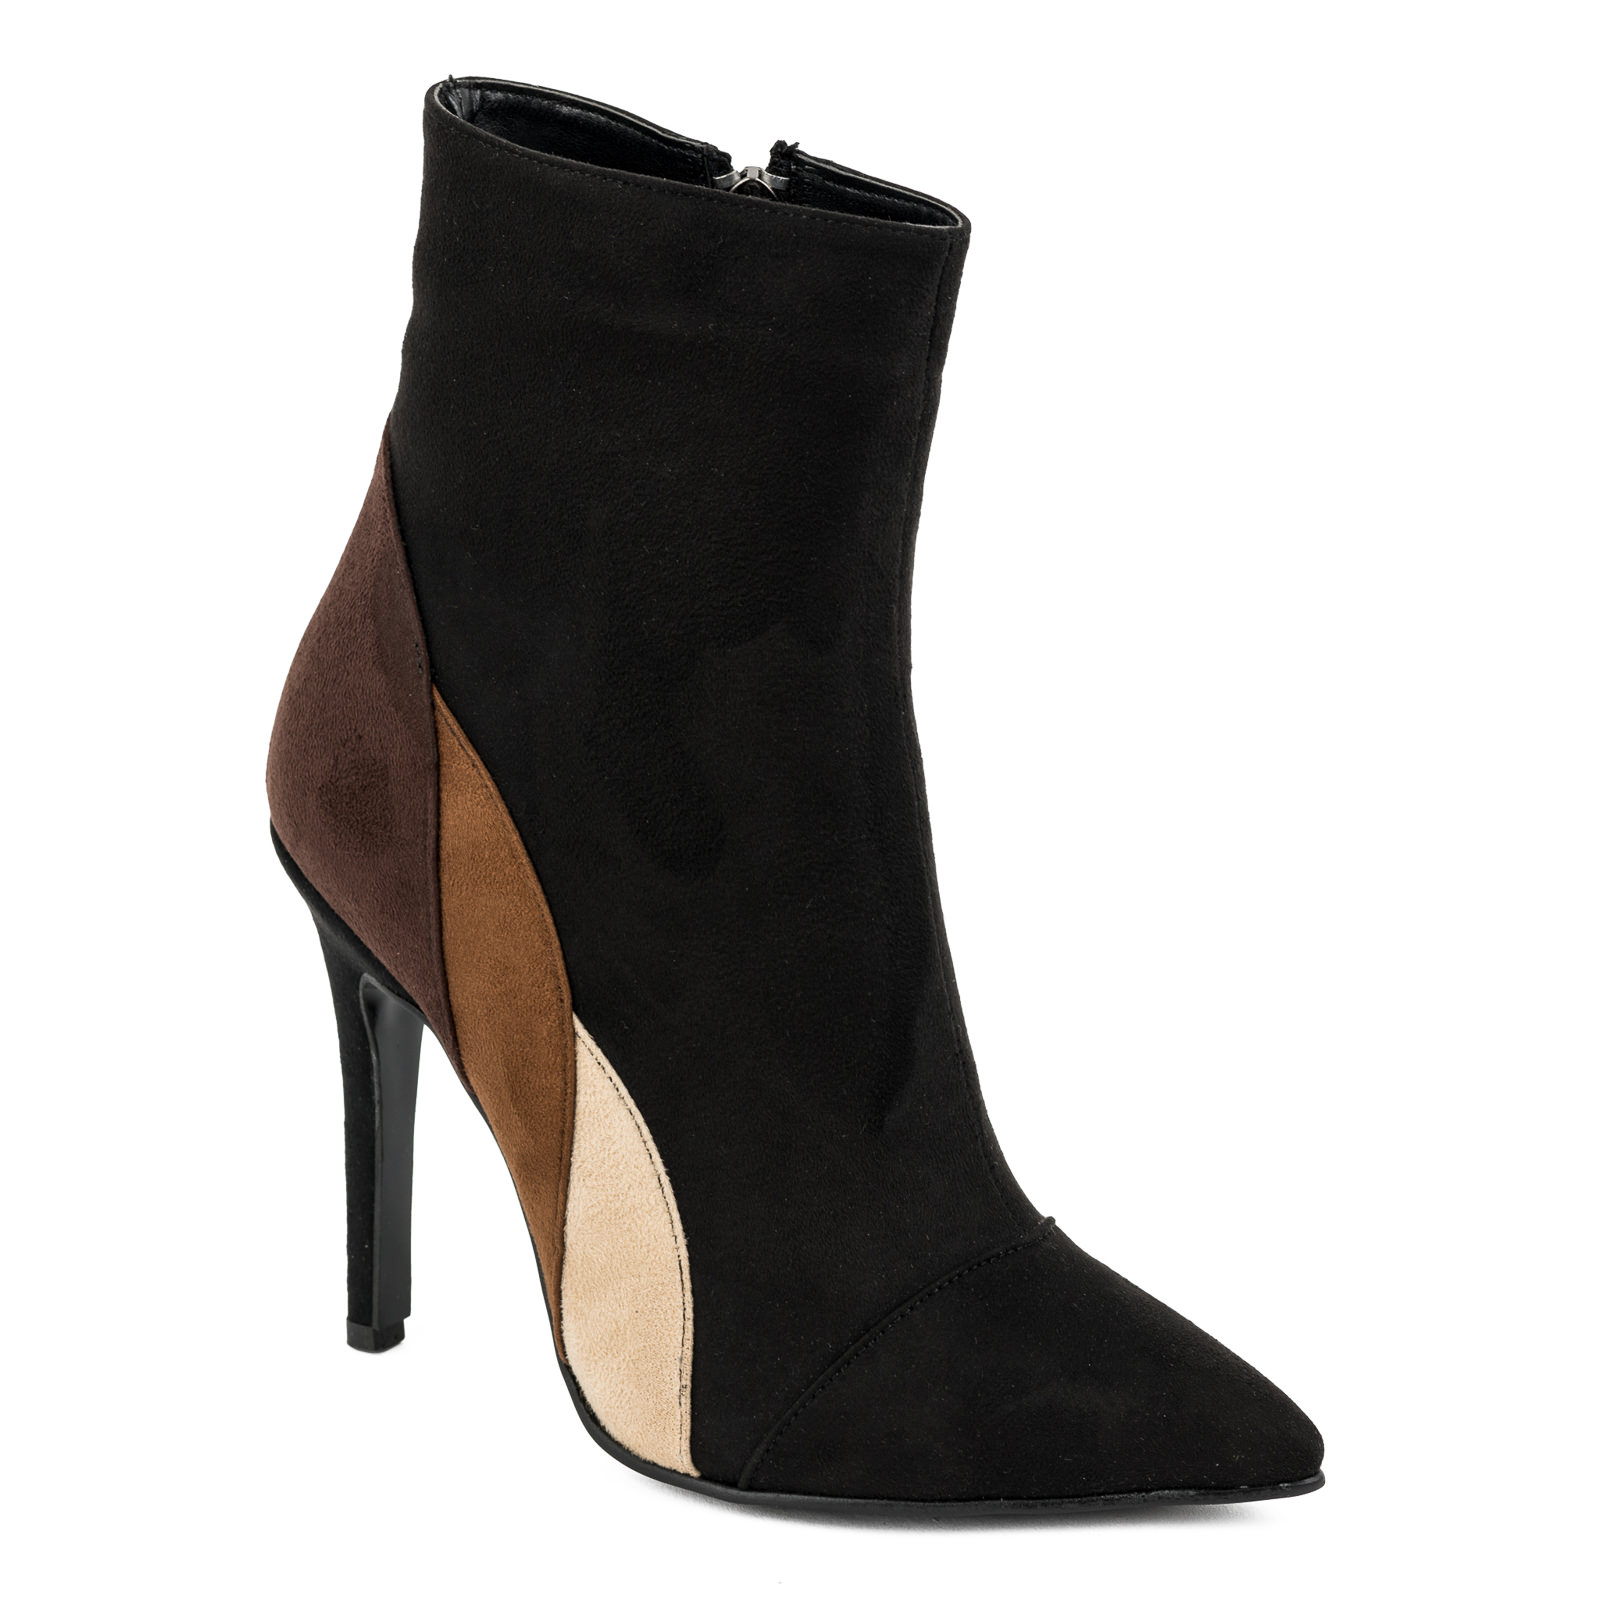 POINTED ANKLE BOOTS WITH THIN HEEL  - BLACK/BROWN